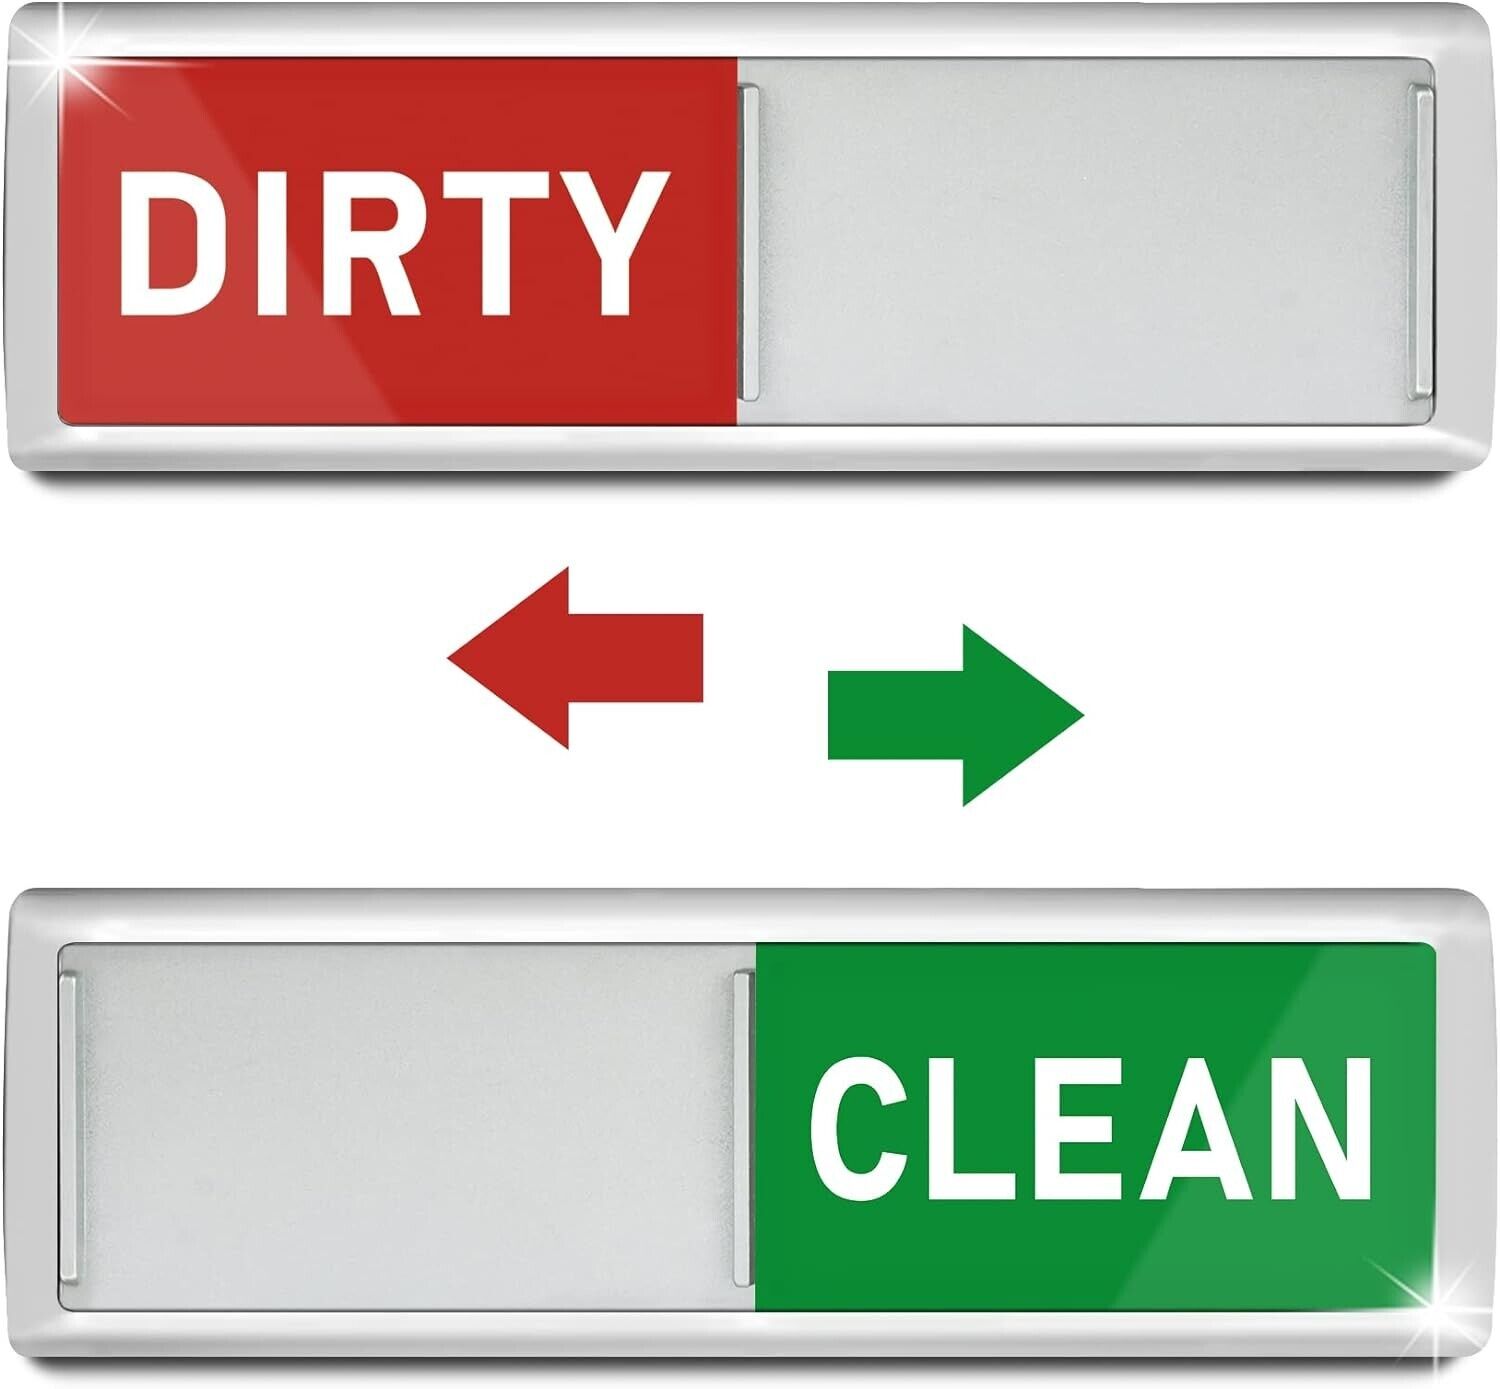 Dirty Clean Dishwasher Magnet,Dishwasher Magnet Clean Dirty Sign Magnet for Dish